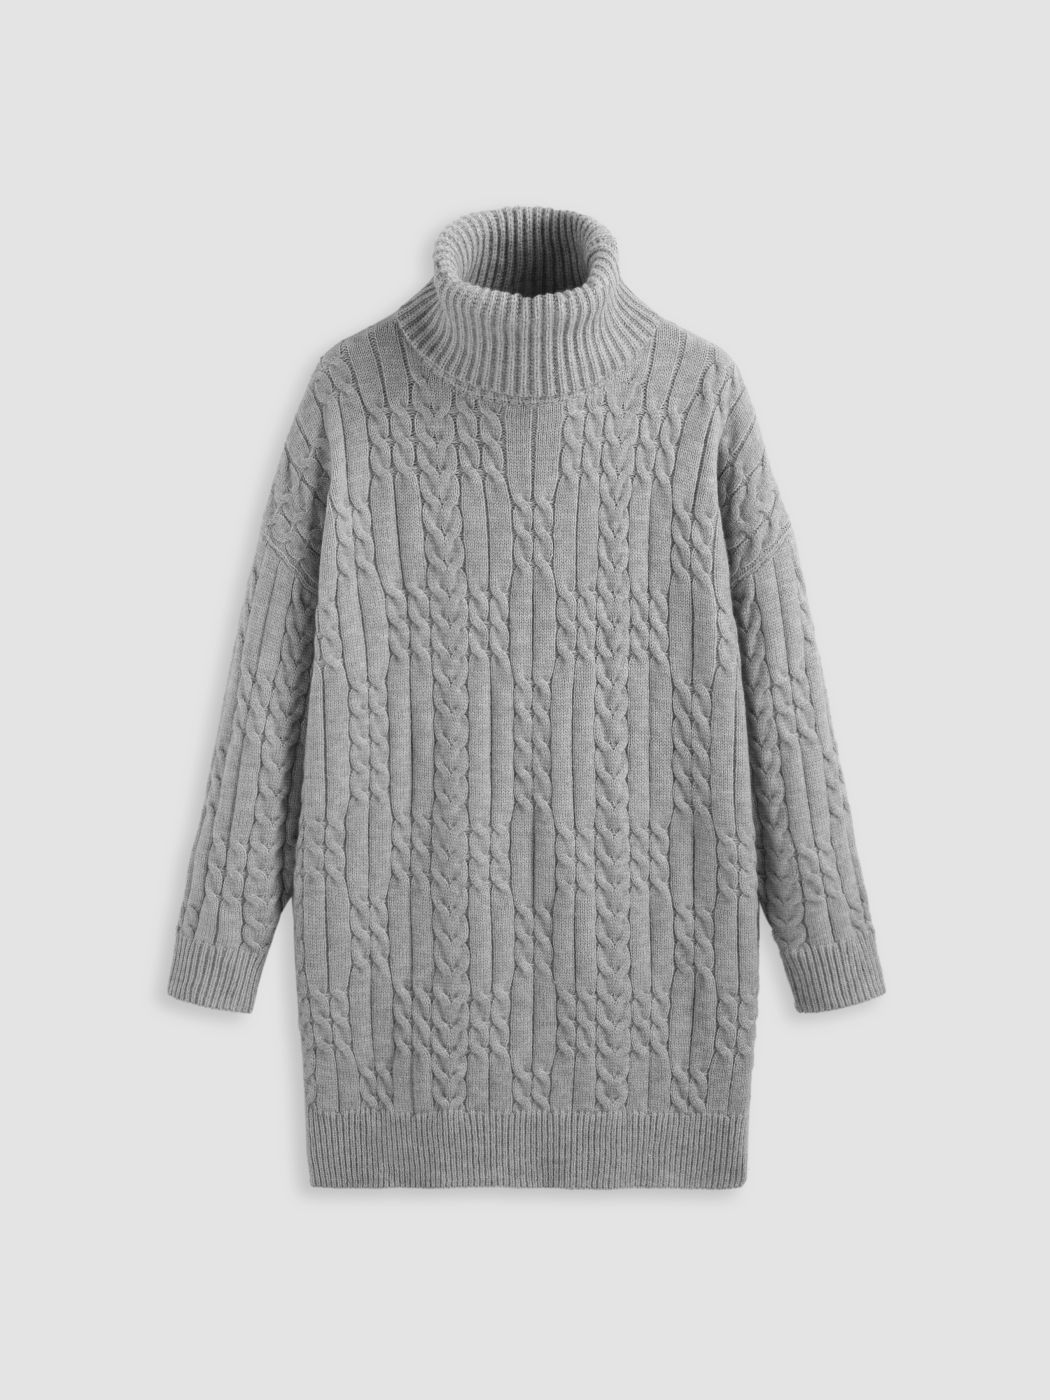 Knit Cable Knit High Neck Solid Mini Dress - Cider